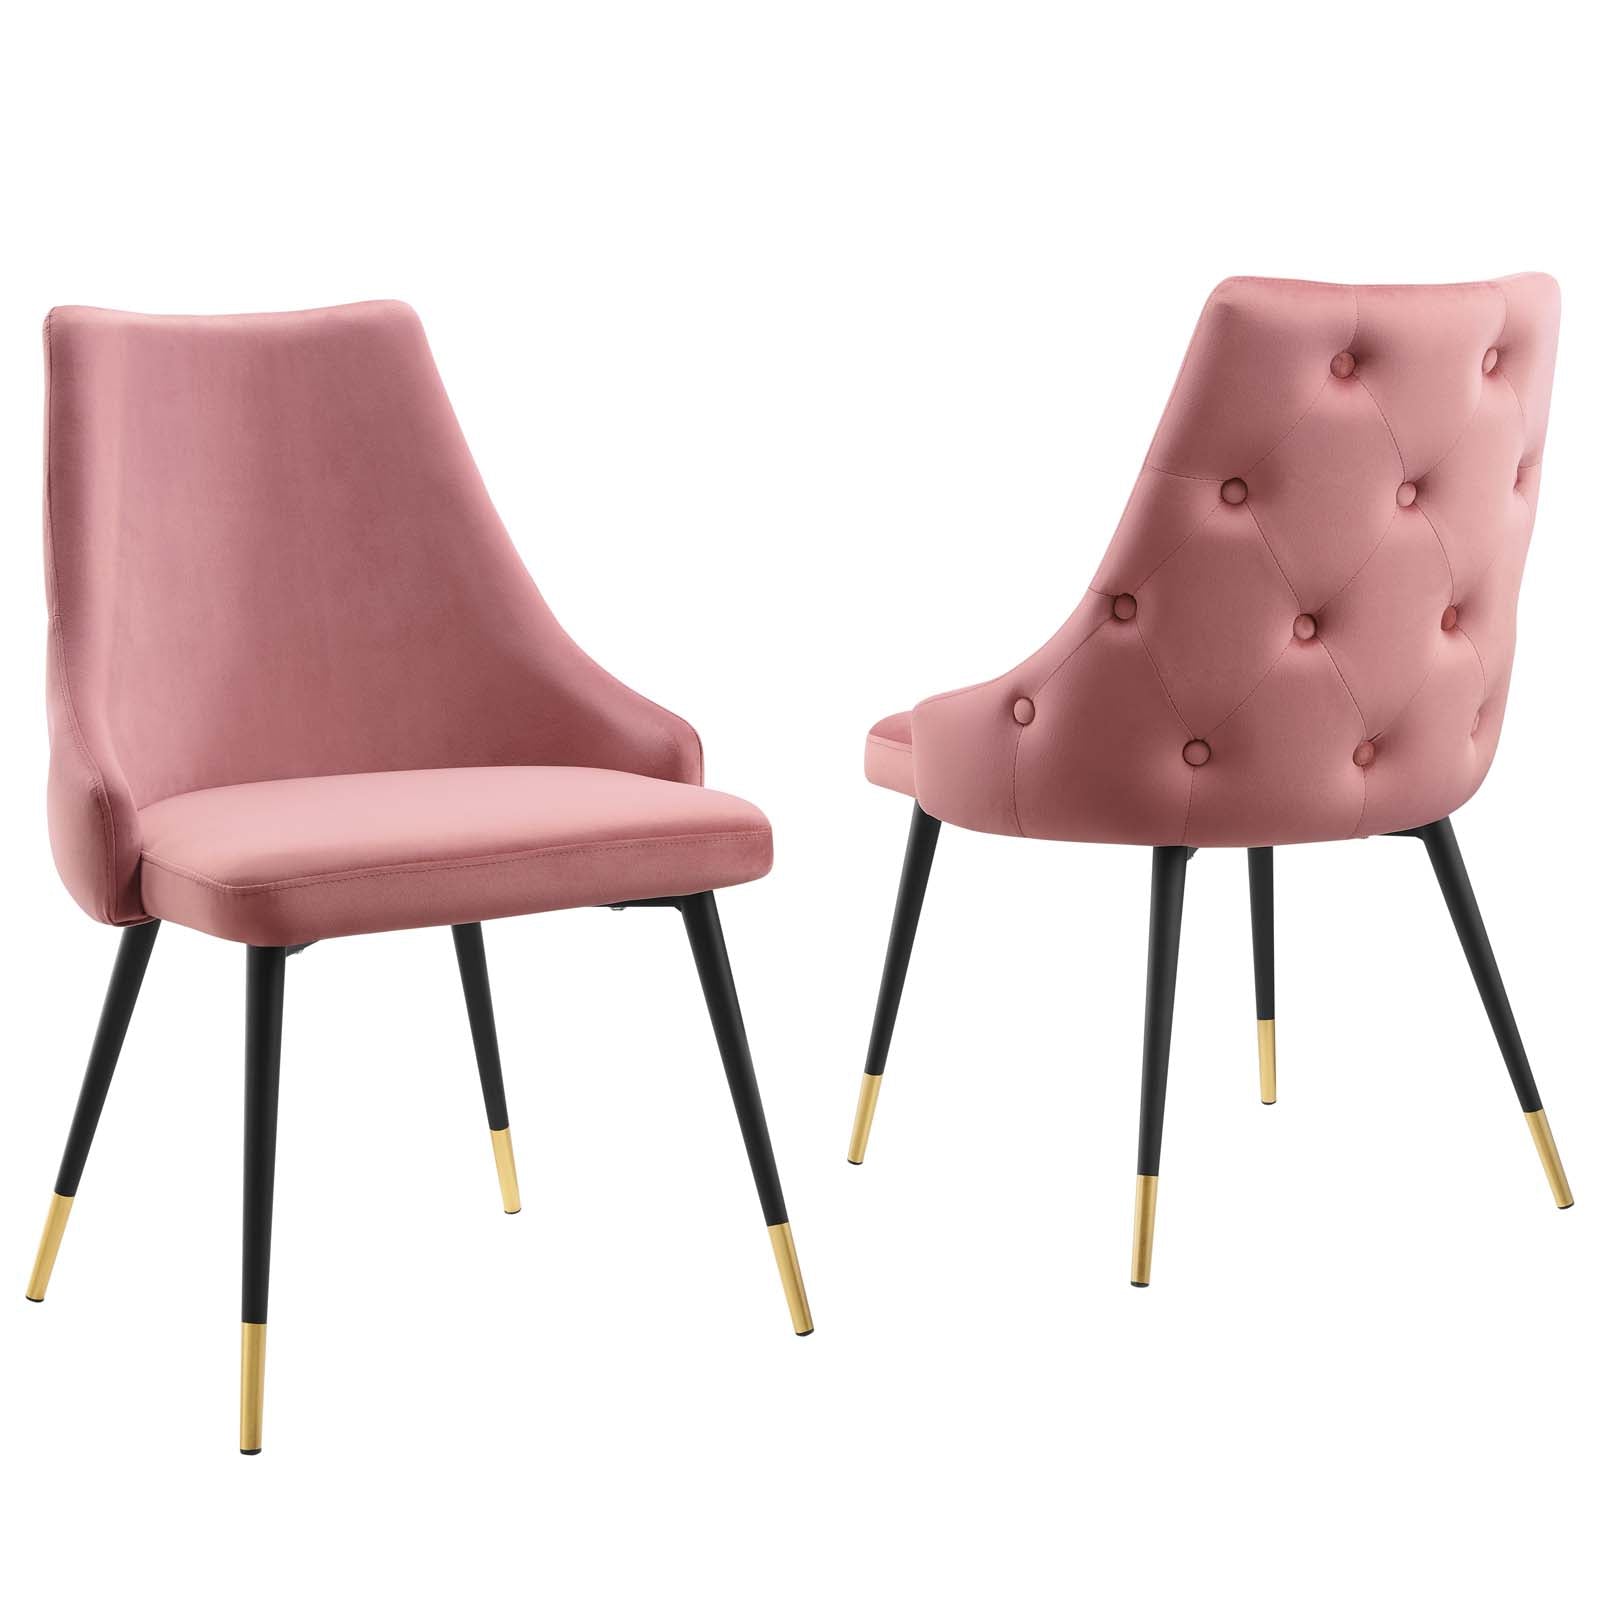 Modway Dining Chairs - Adorn Dining Side Chair Performance Velvet Dusty Rose (Set of 2)